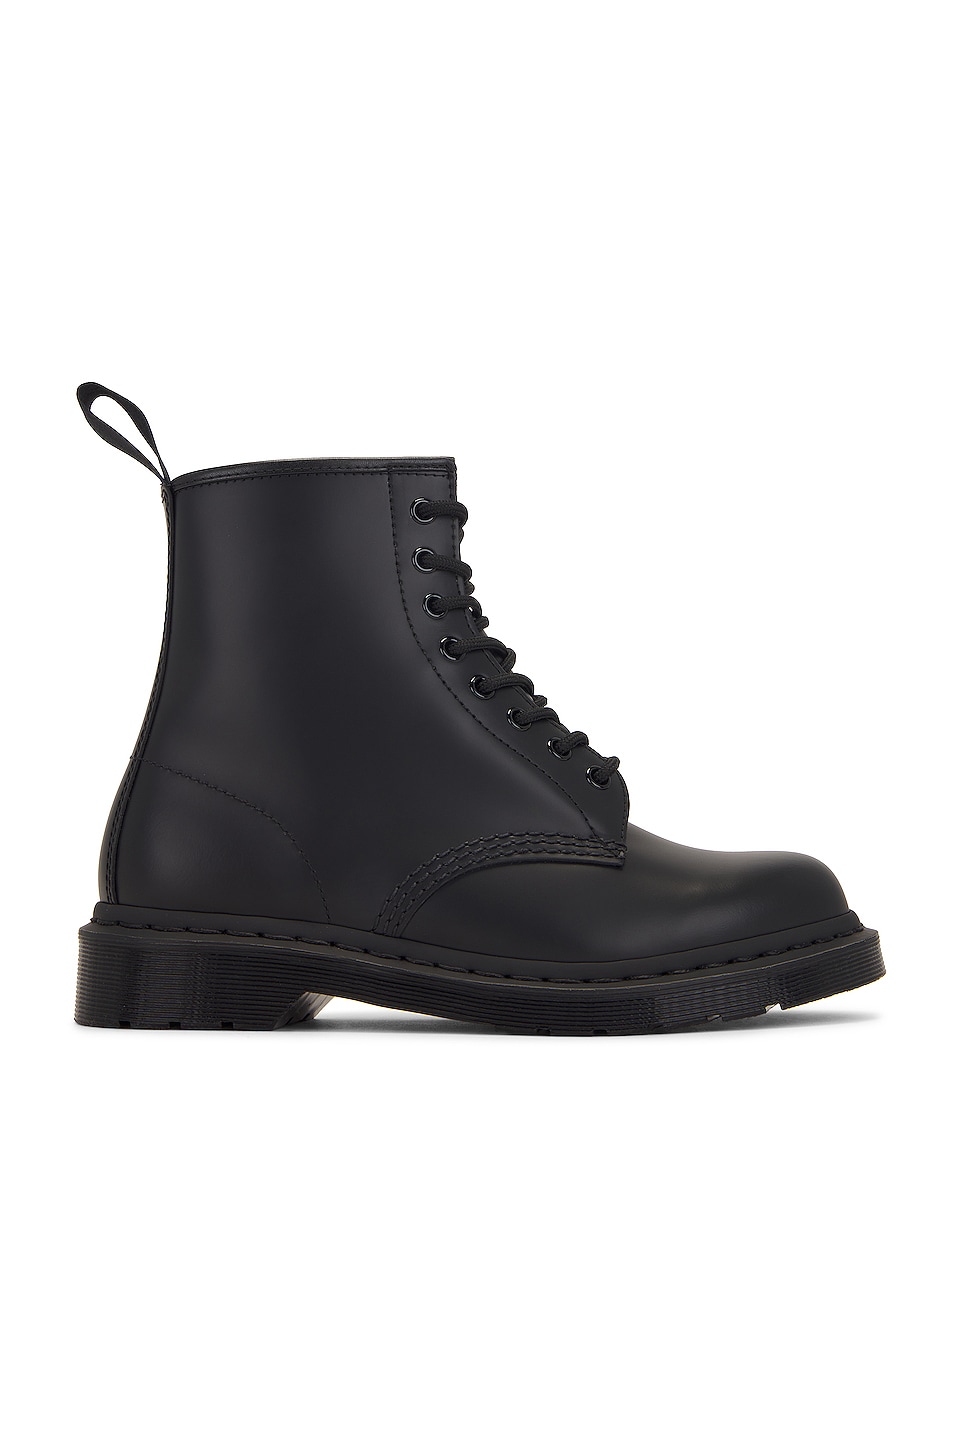 Dr. Martens 1460 Mono Smooth Boot in Black | REVOLVE